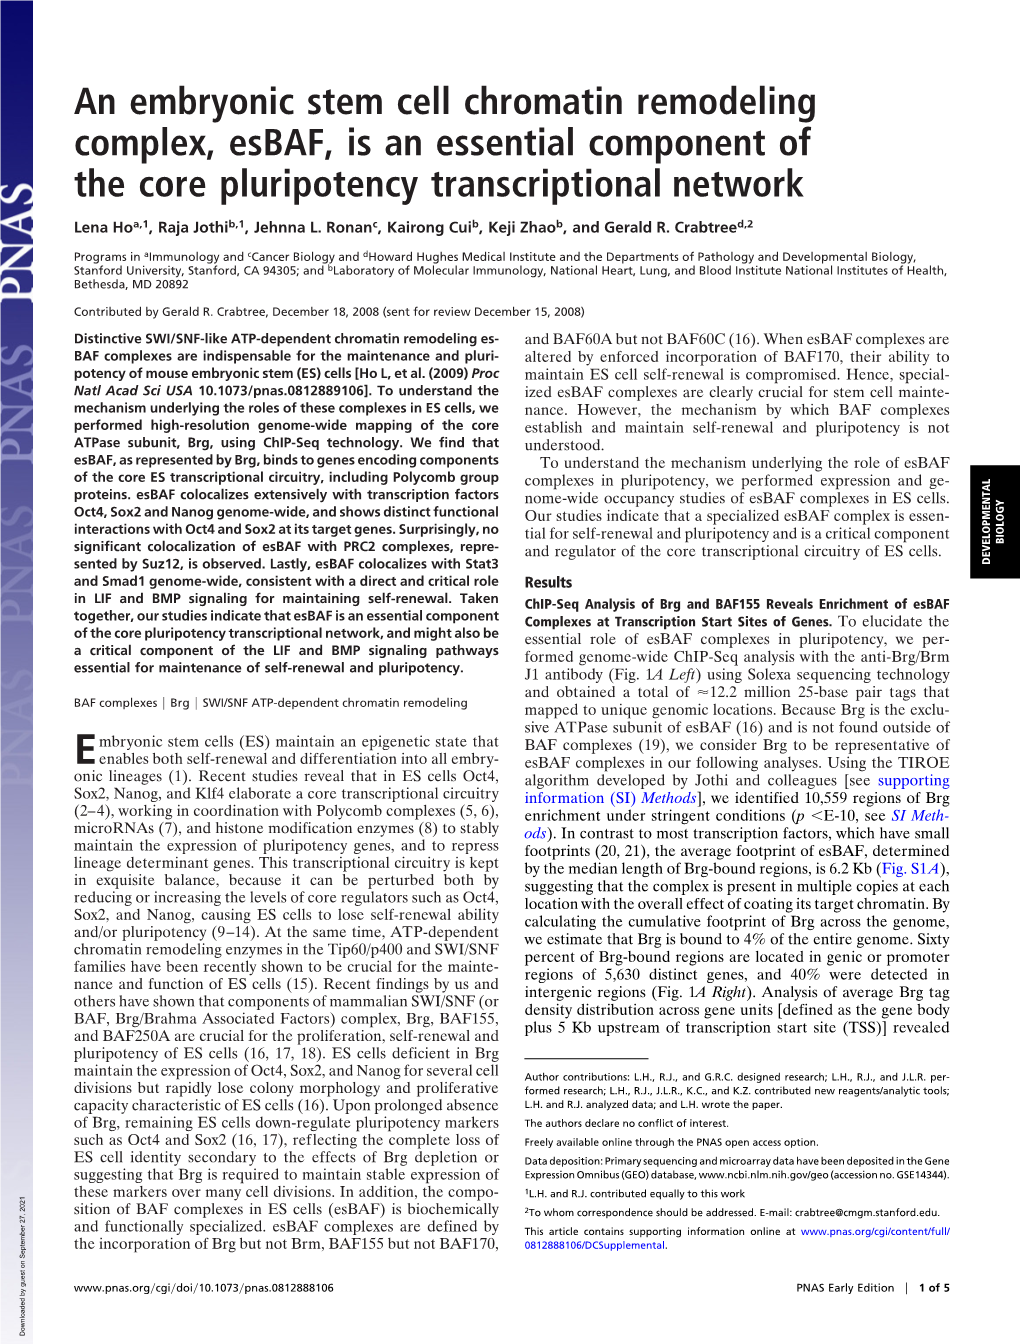 An Embryonic Stem Cell Chromatin Remodeling Complex, Esbaf, Is an Essential Component of the Core Pluripotency Transcriptional Network